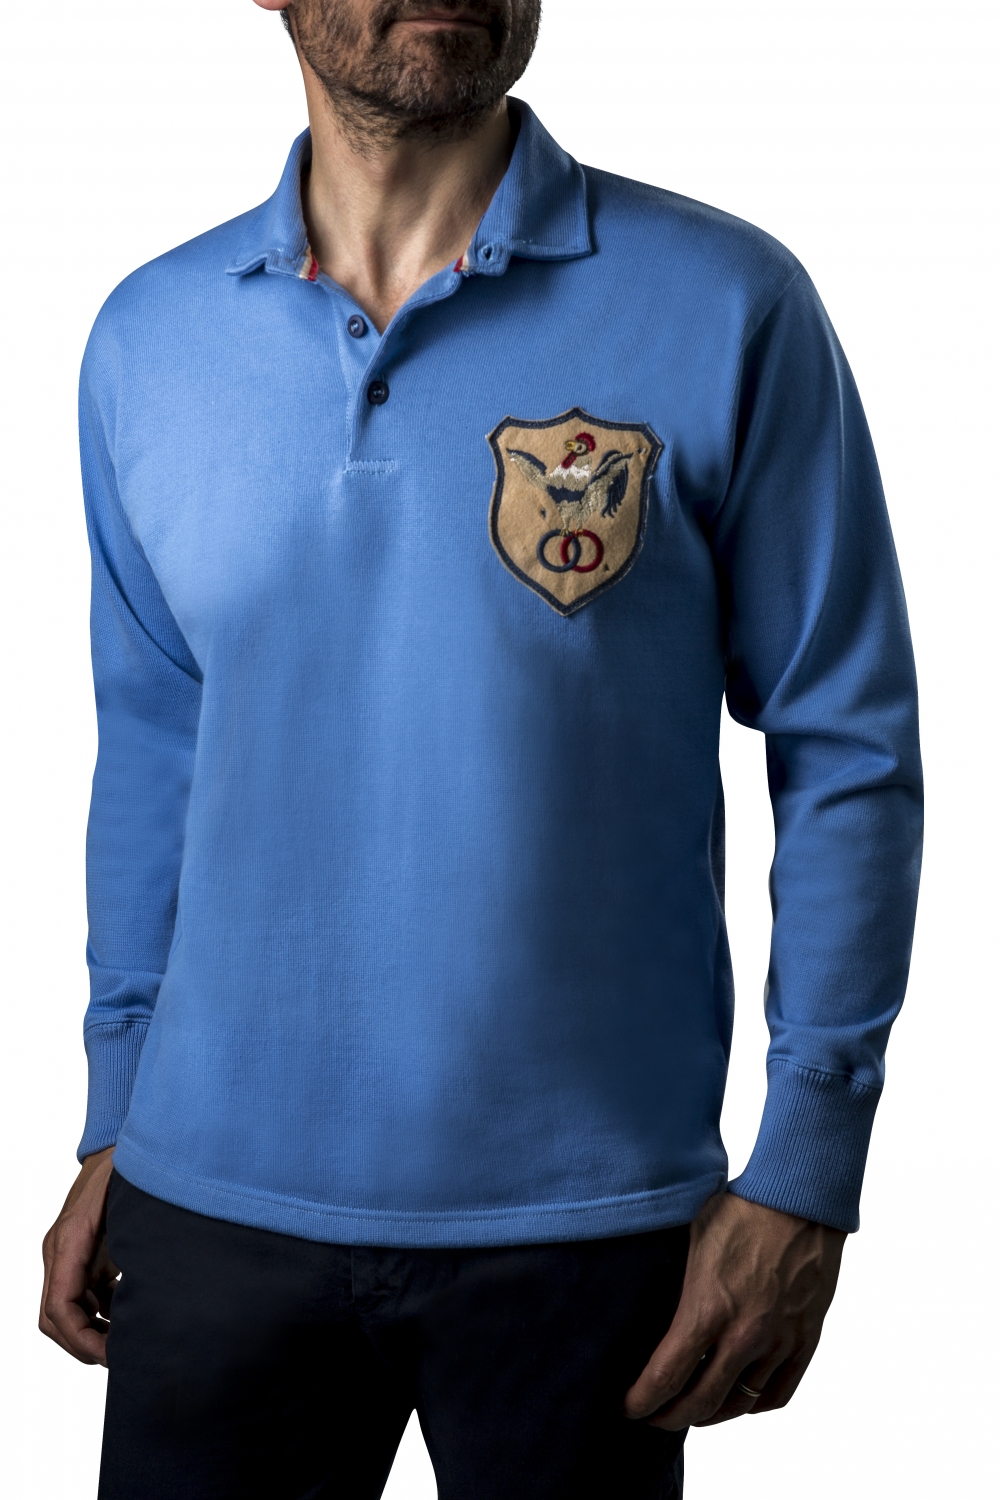 Maillot Rugby XV de France 1922